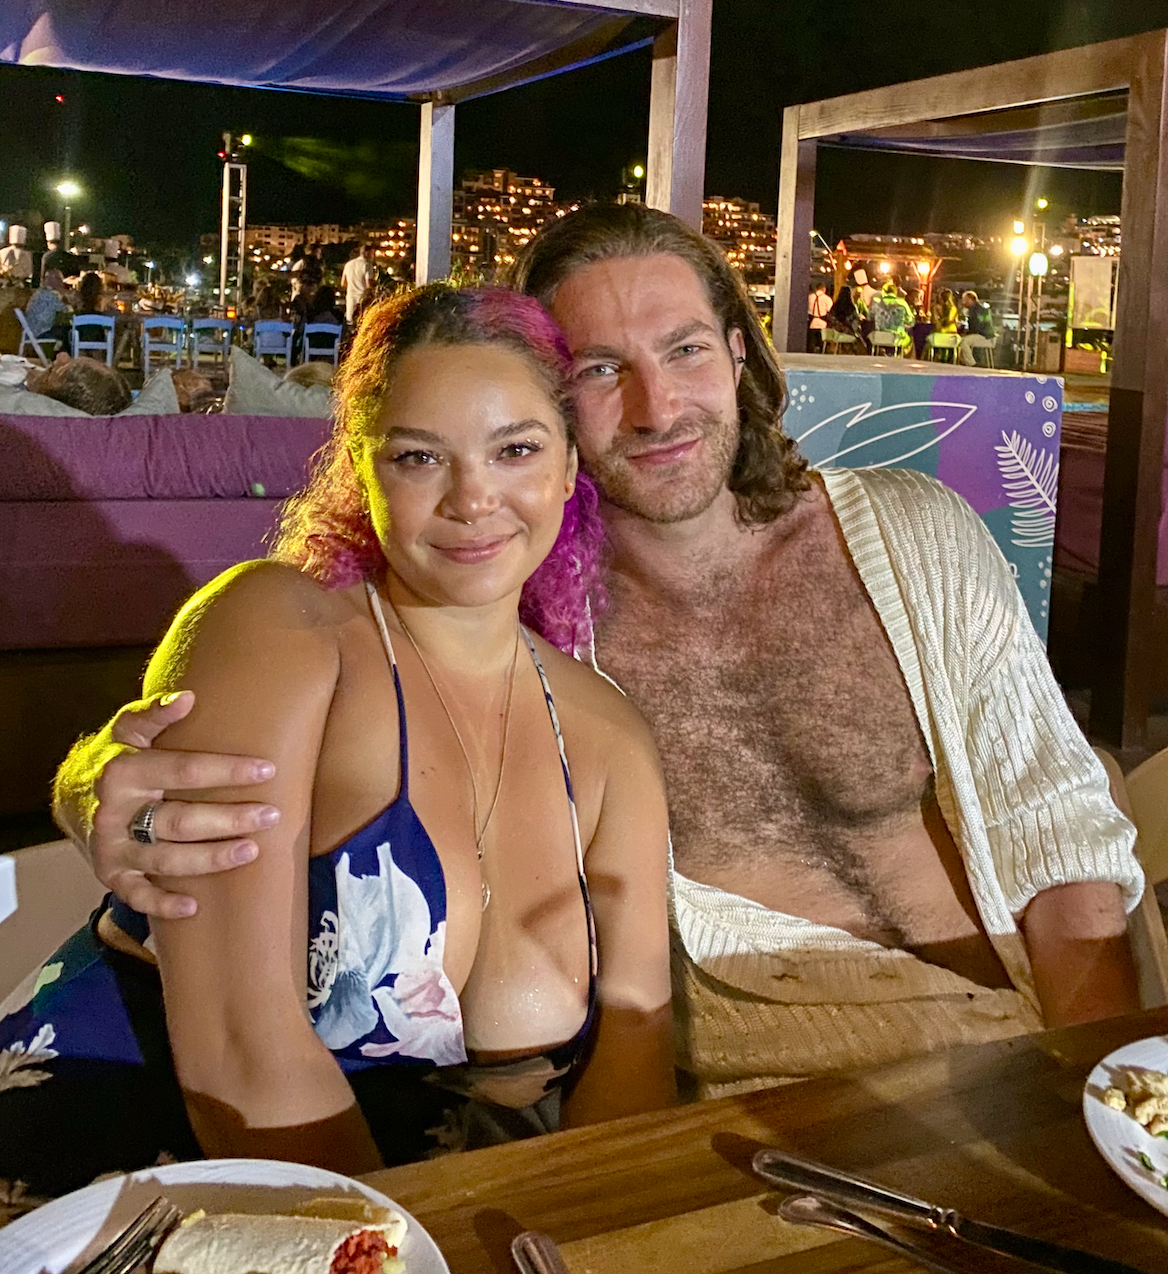 Fat old couple fucking in their living room on a holiday